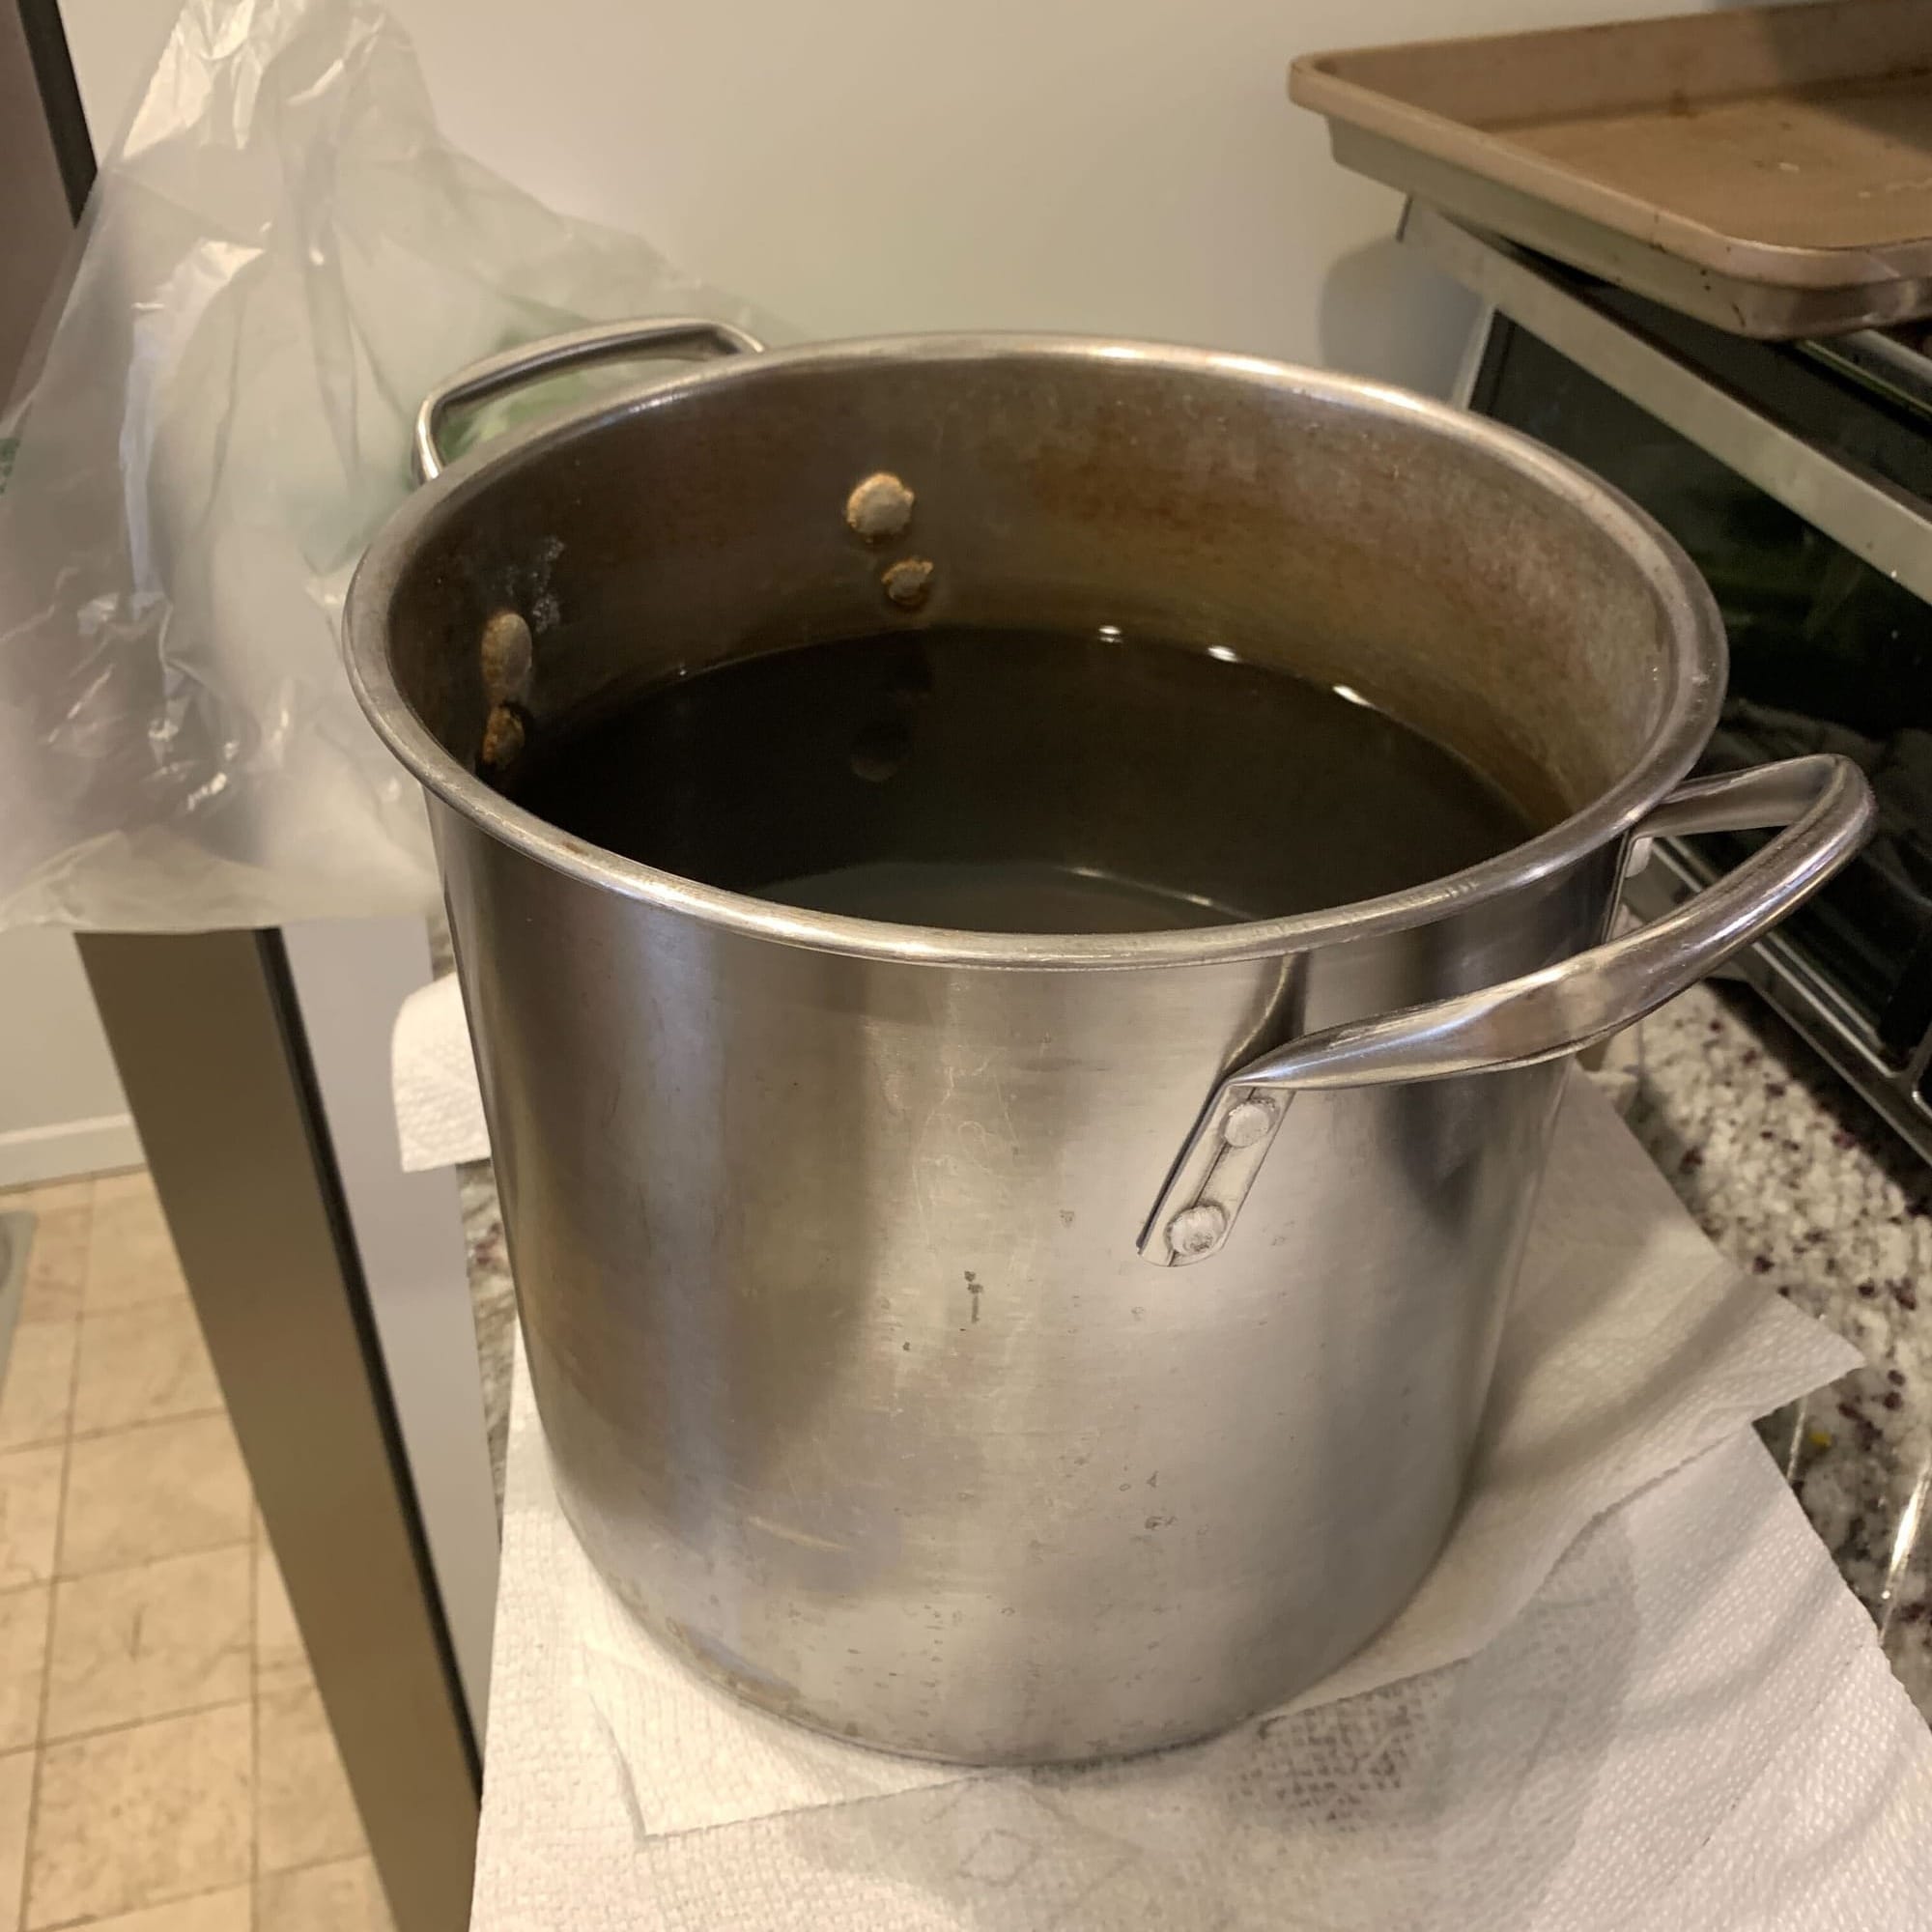 A battered steel pot with water just below its internal rivets sits on a damp paper towel on a granite kitchen counter. A toaster is visible to the right and a tile floor to the left, and there's a clear plastic bag sticking up behind the pot. 